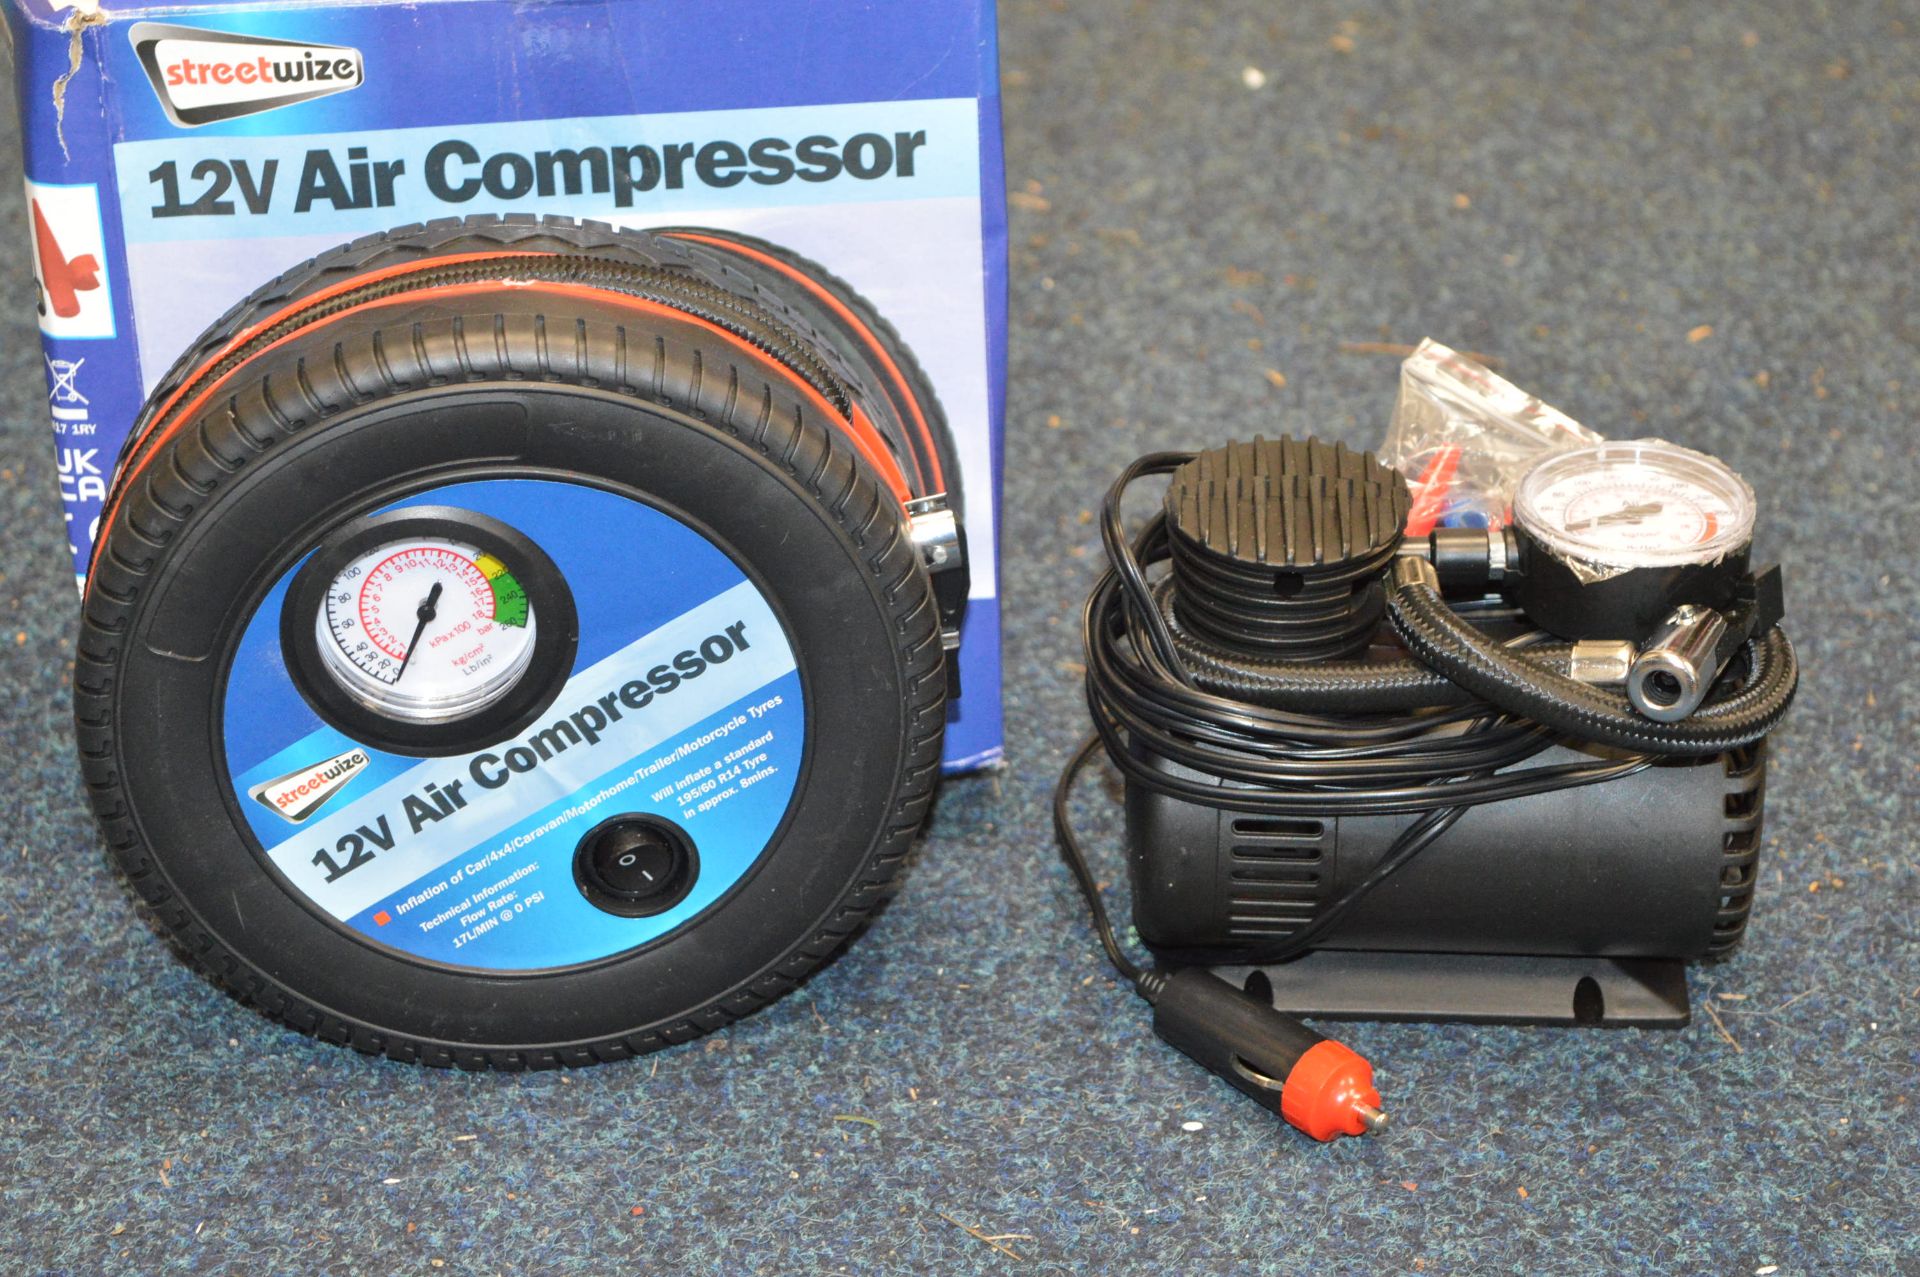 *Street Wise 12v Air Compressor and One Other